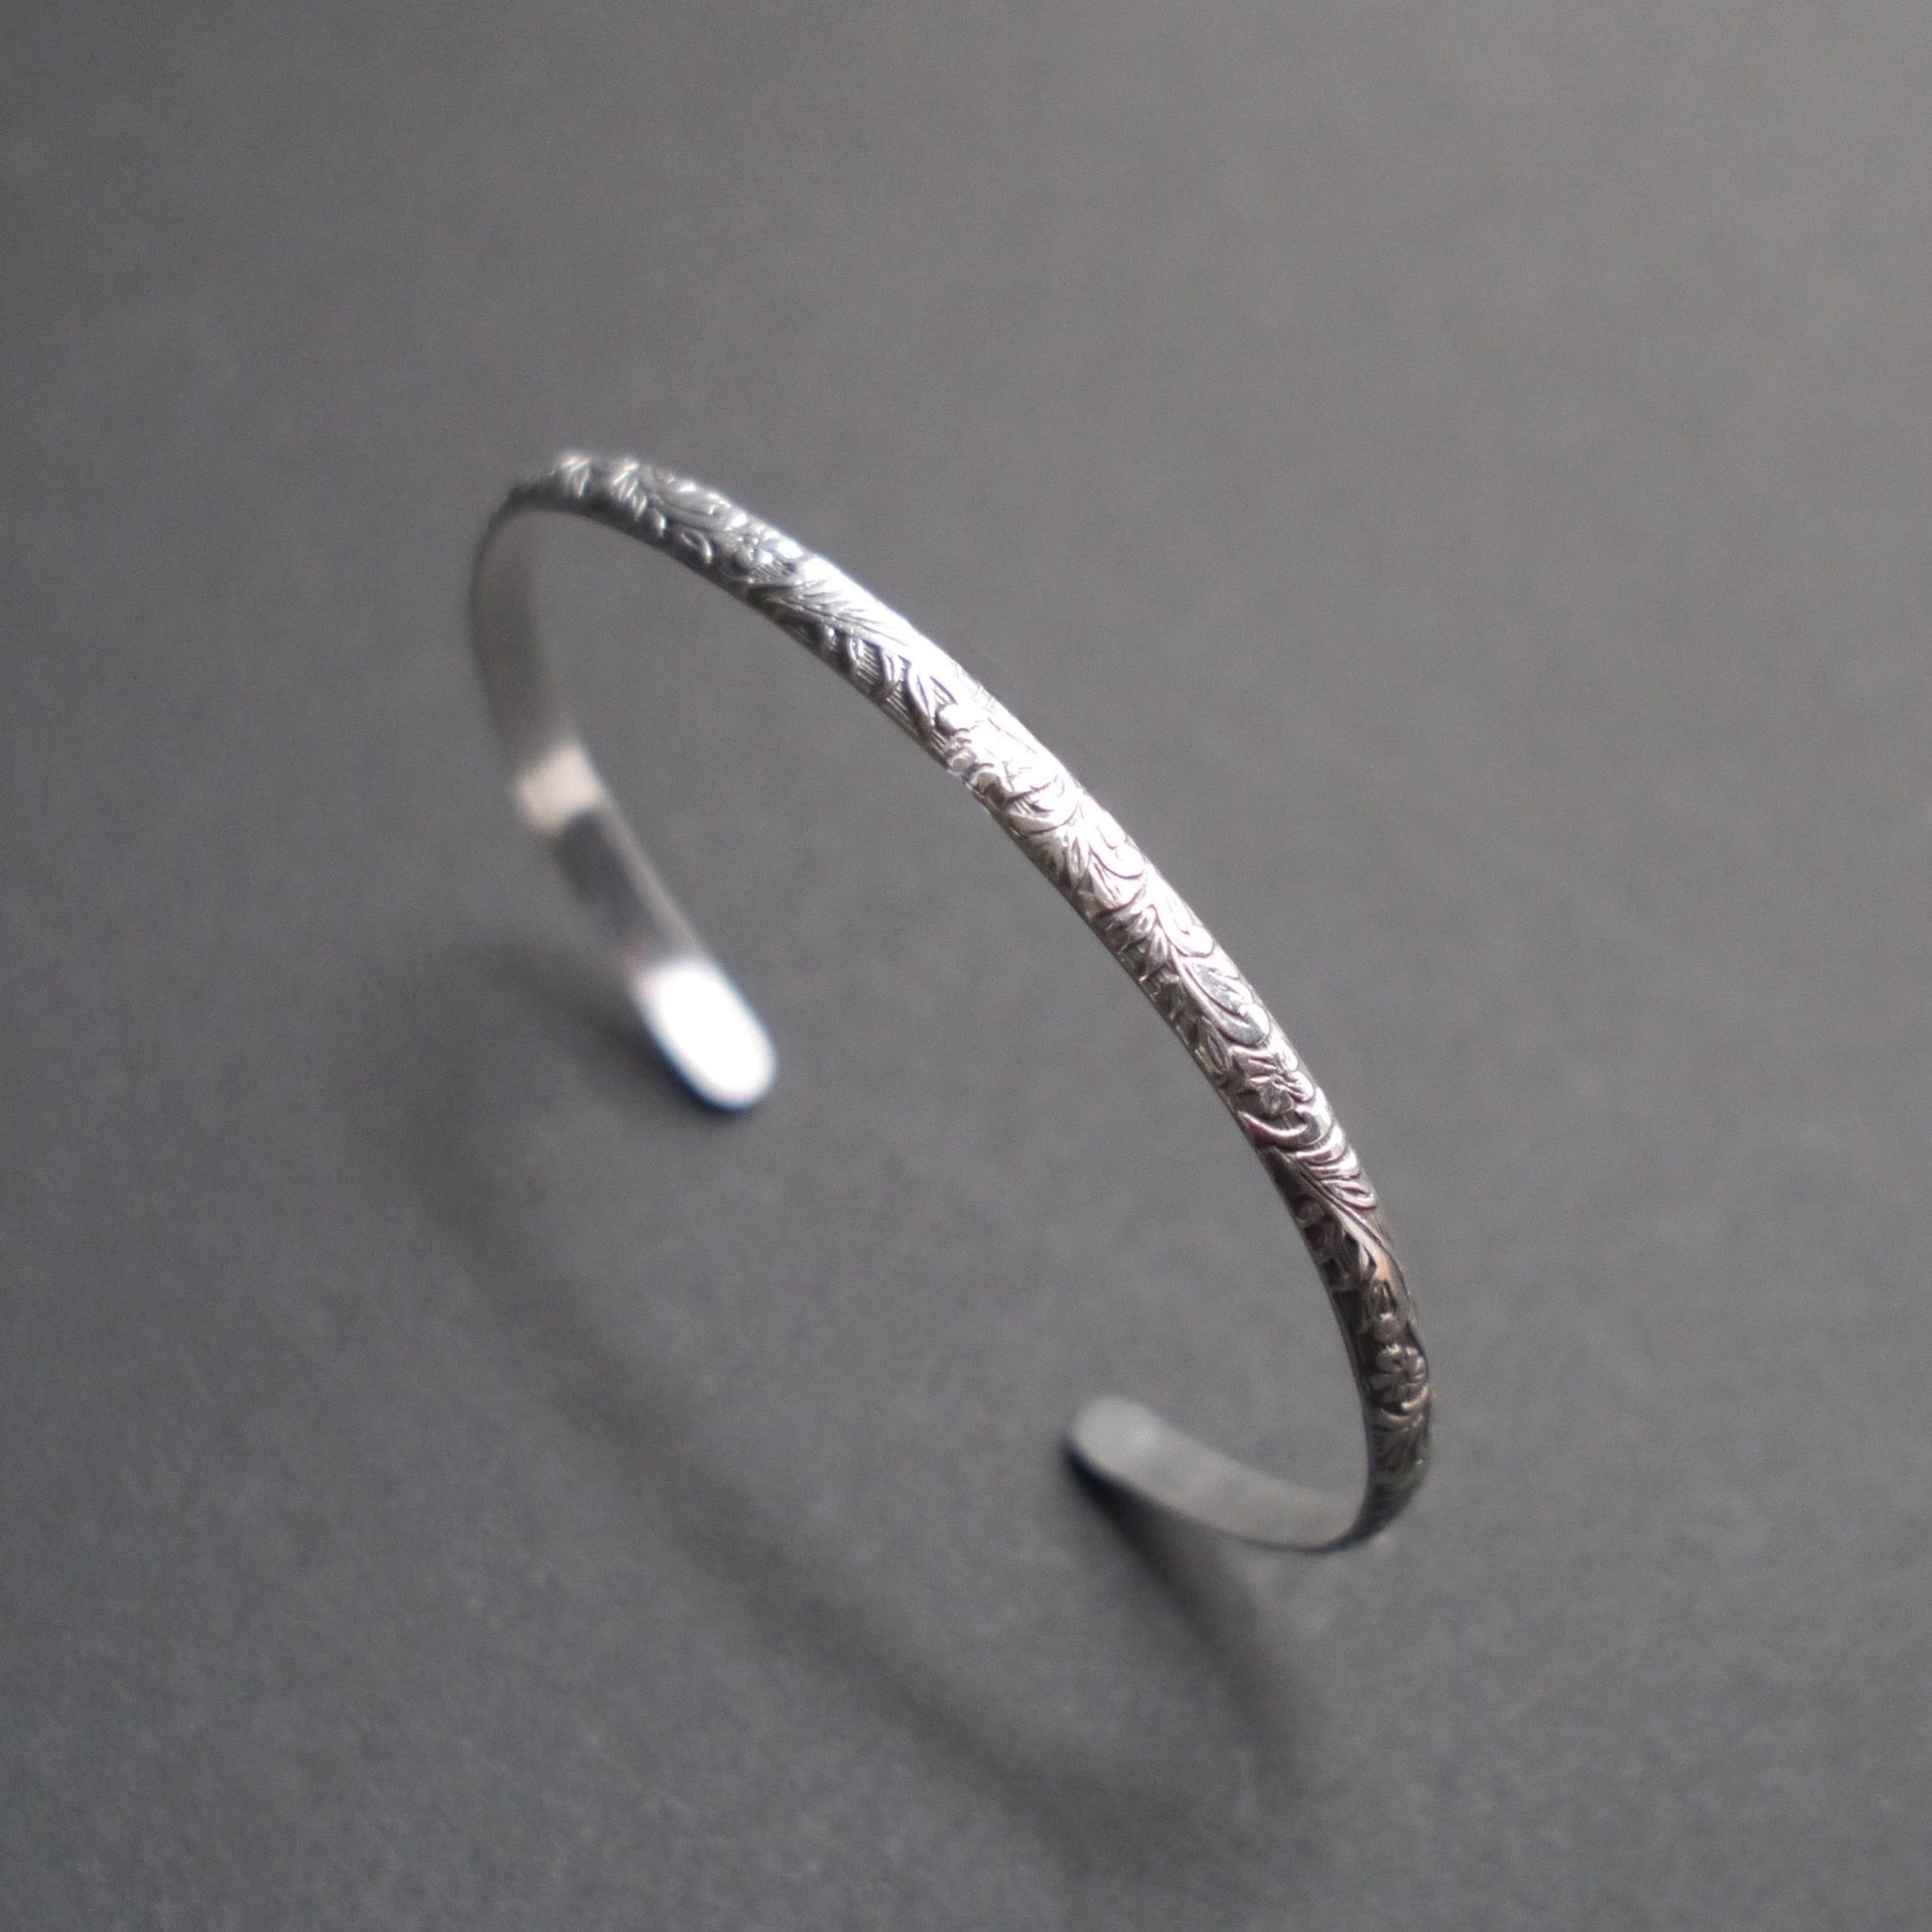 Floral Vine Cuff in 4mm Sterling Silver